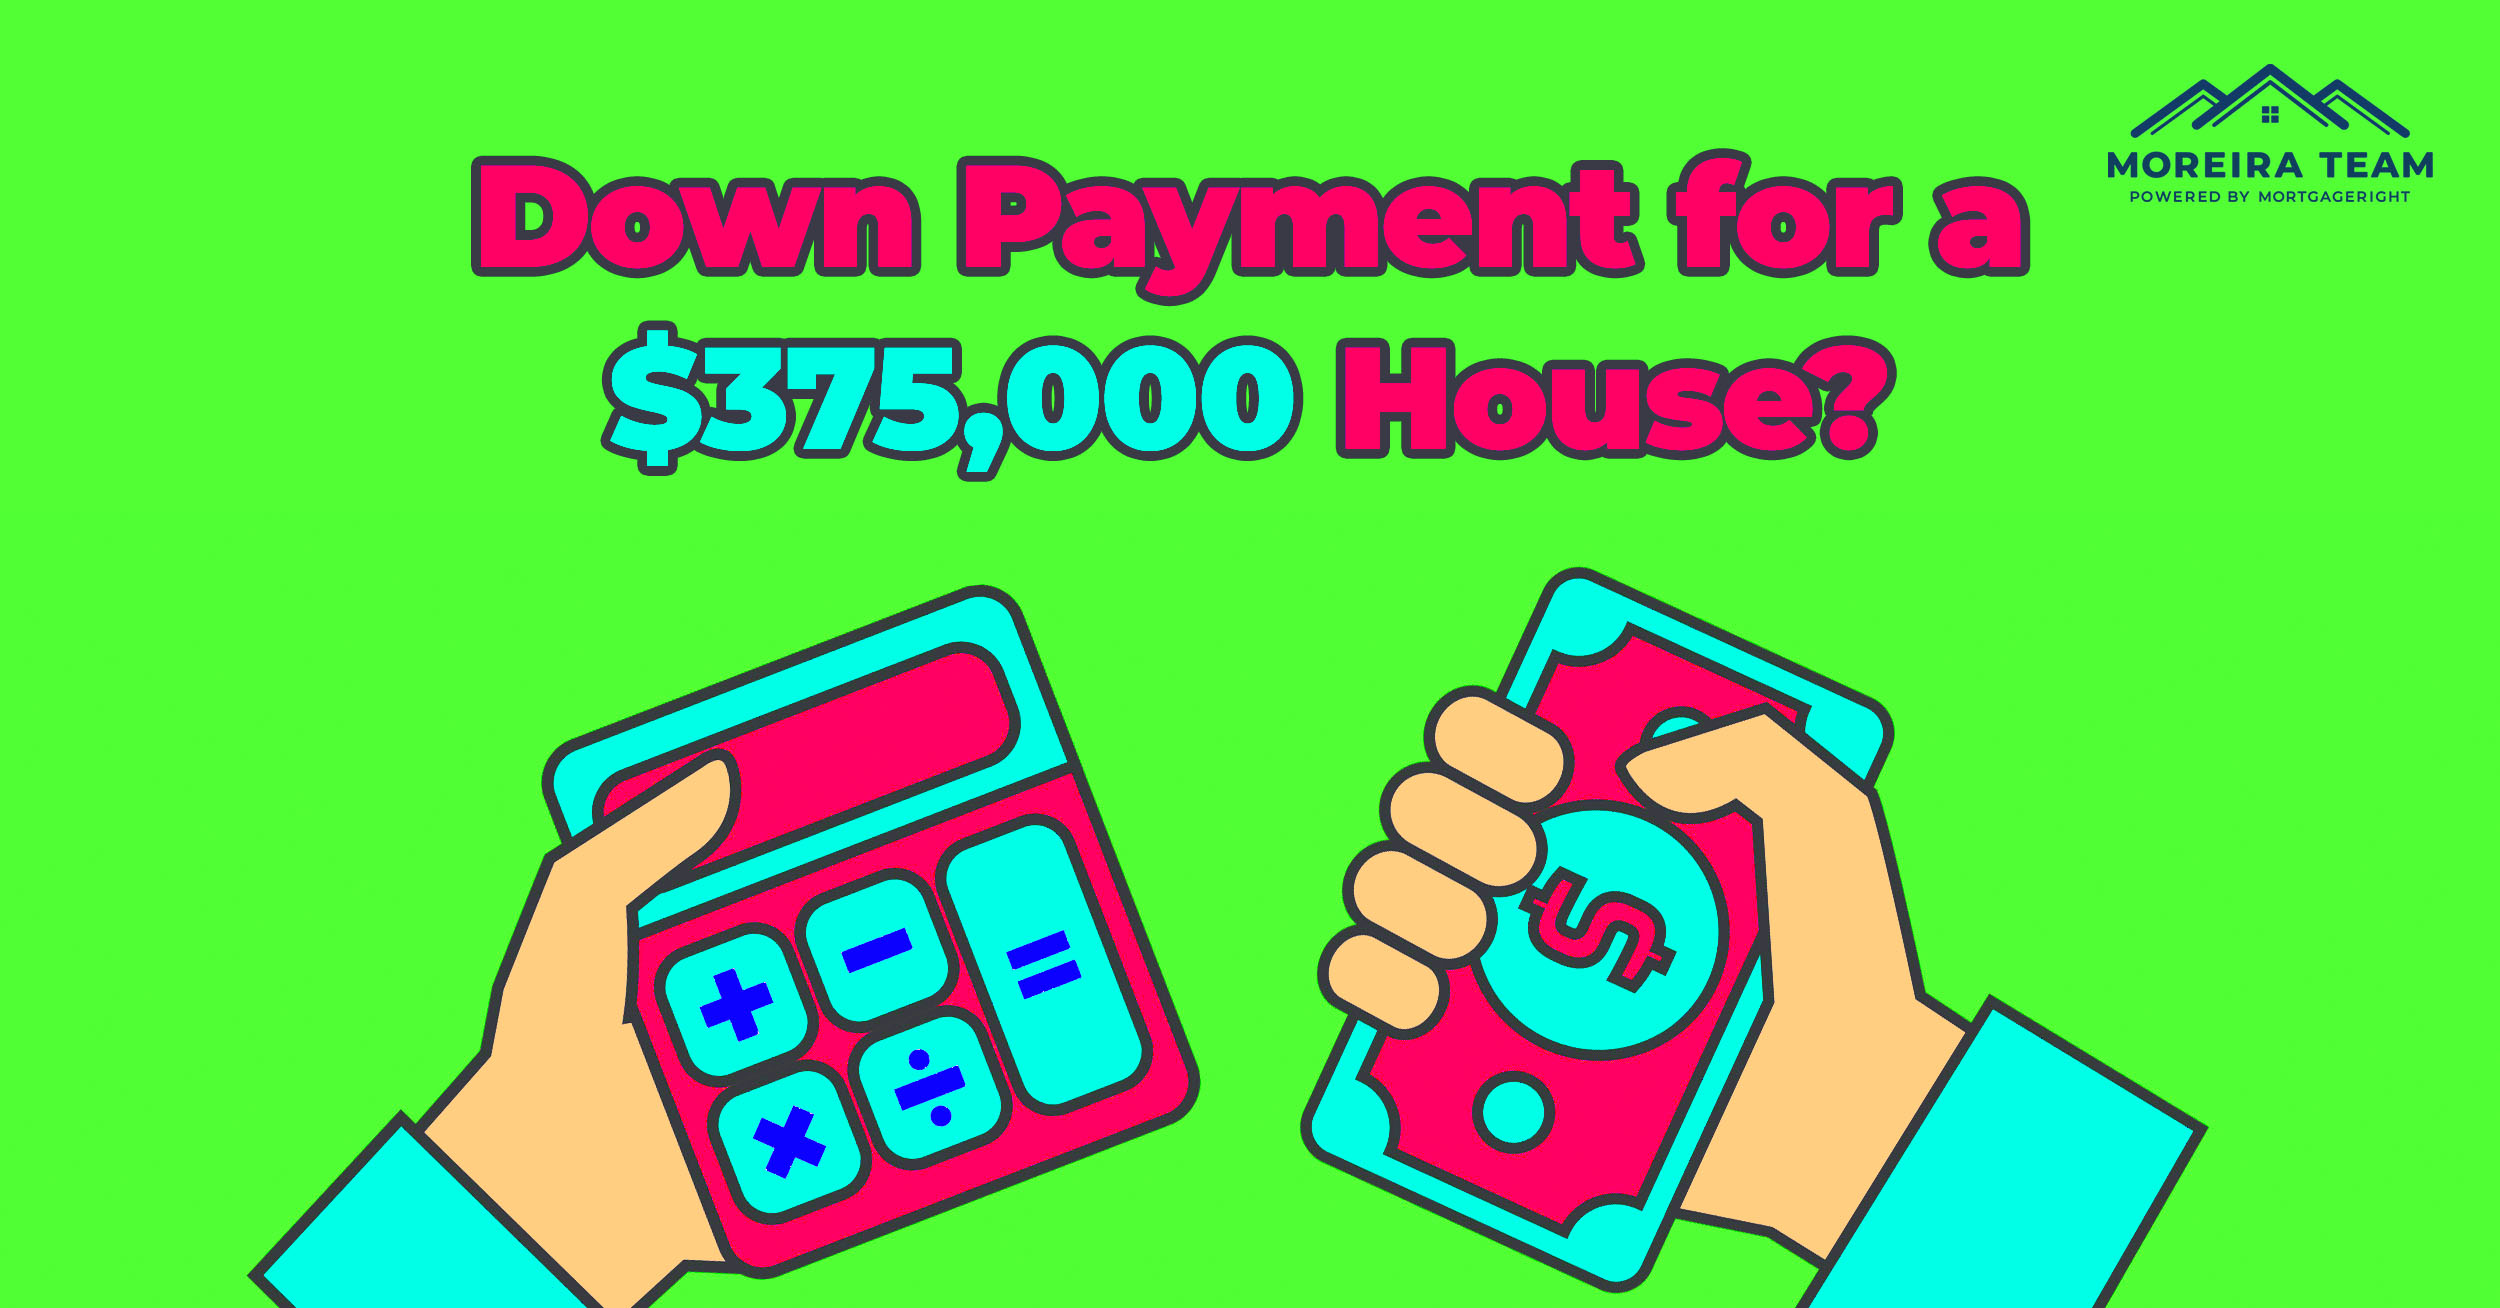 How Much is the Down Payment for a $375,000 Home?